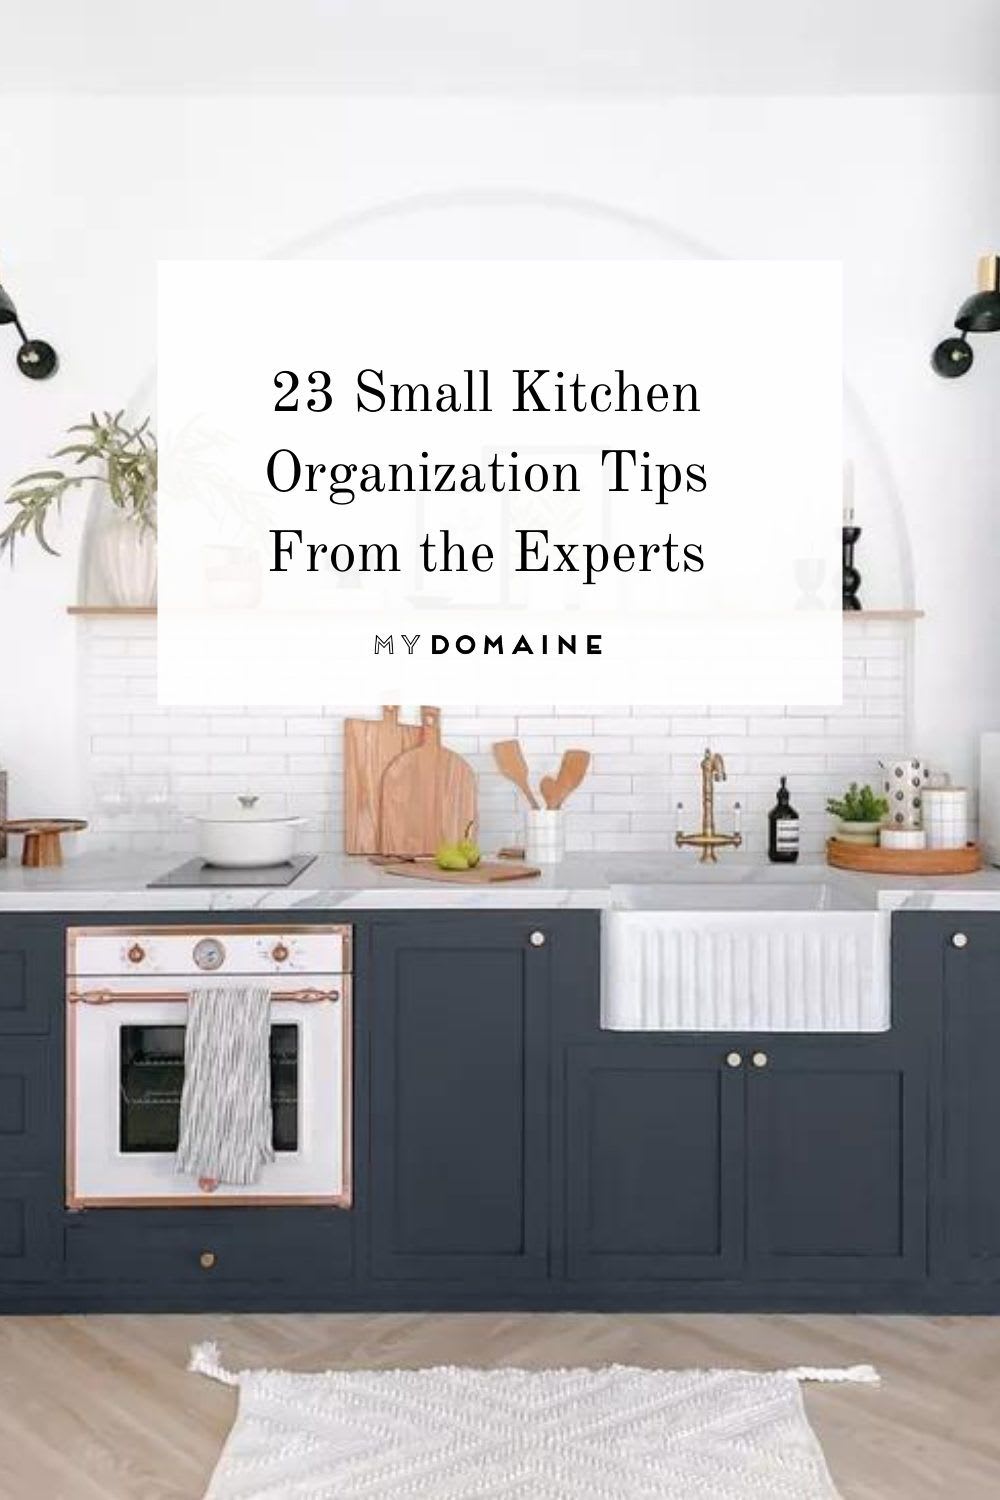 23 Small Kitchen Organization Tips From the Experts